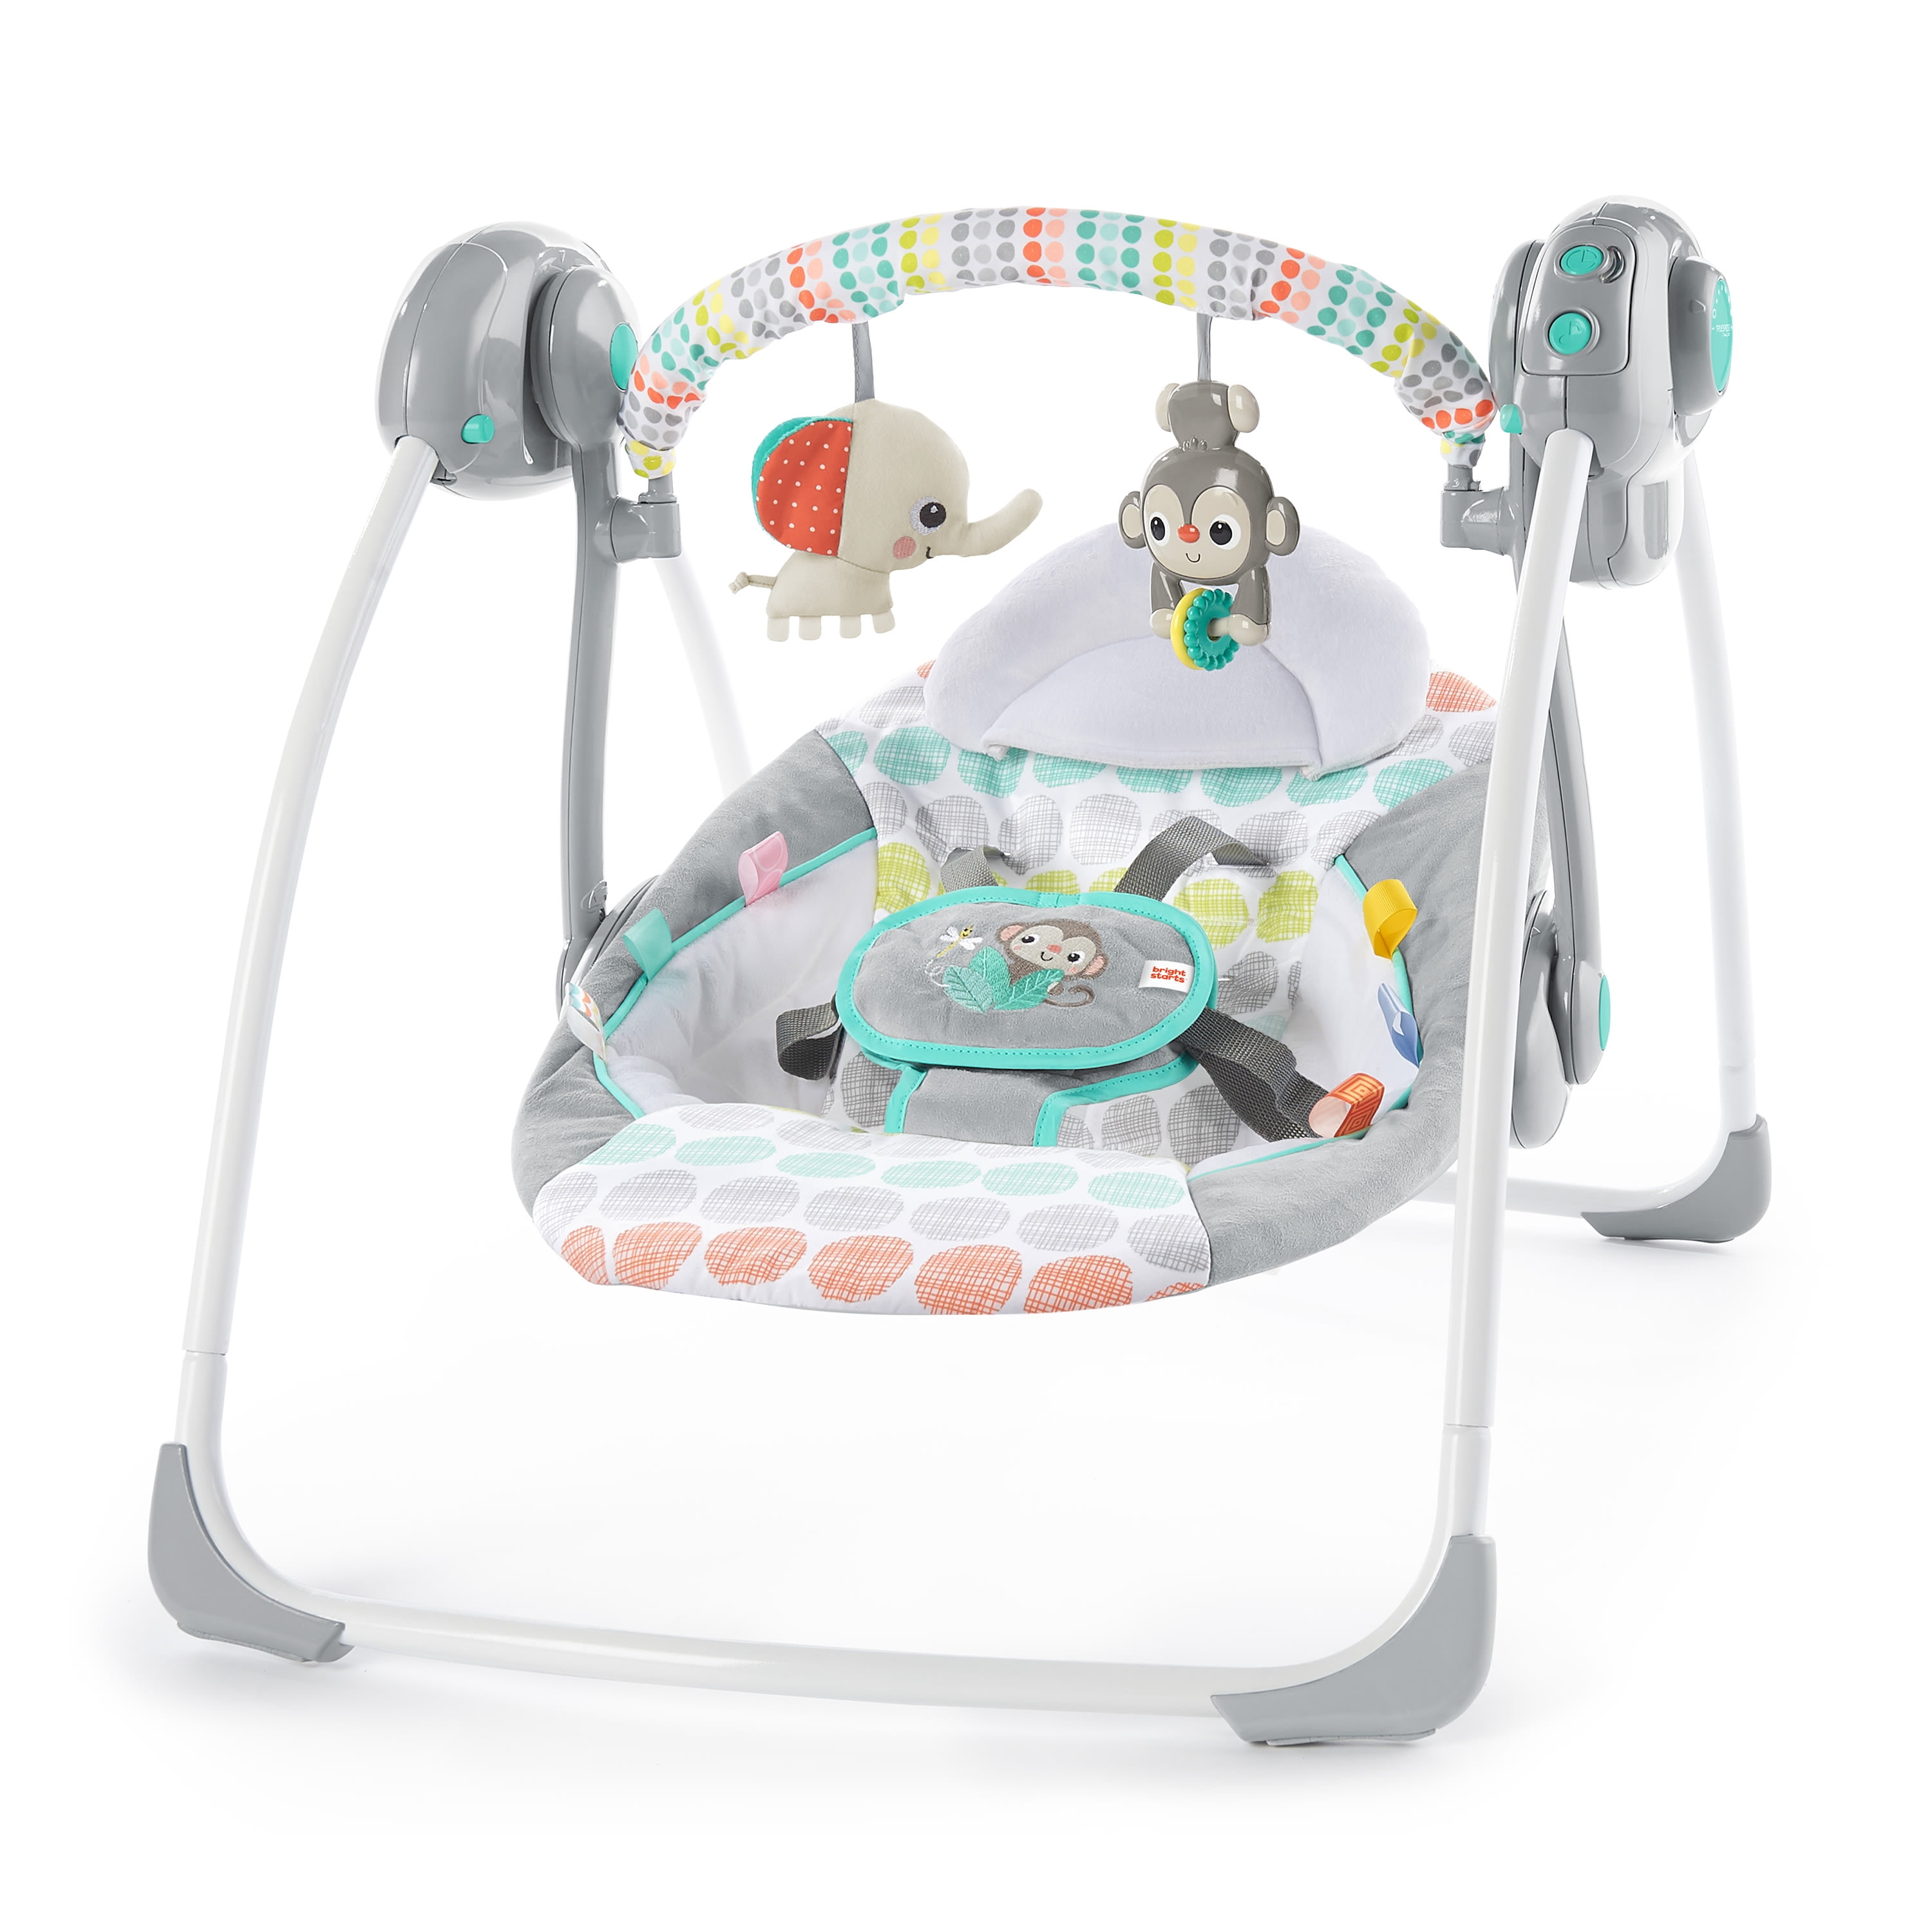 Bright Starts - Whimsical Wild Portable Baby Swing